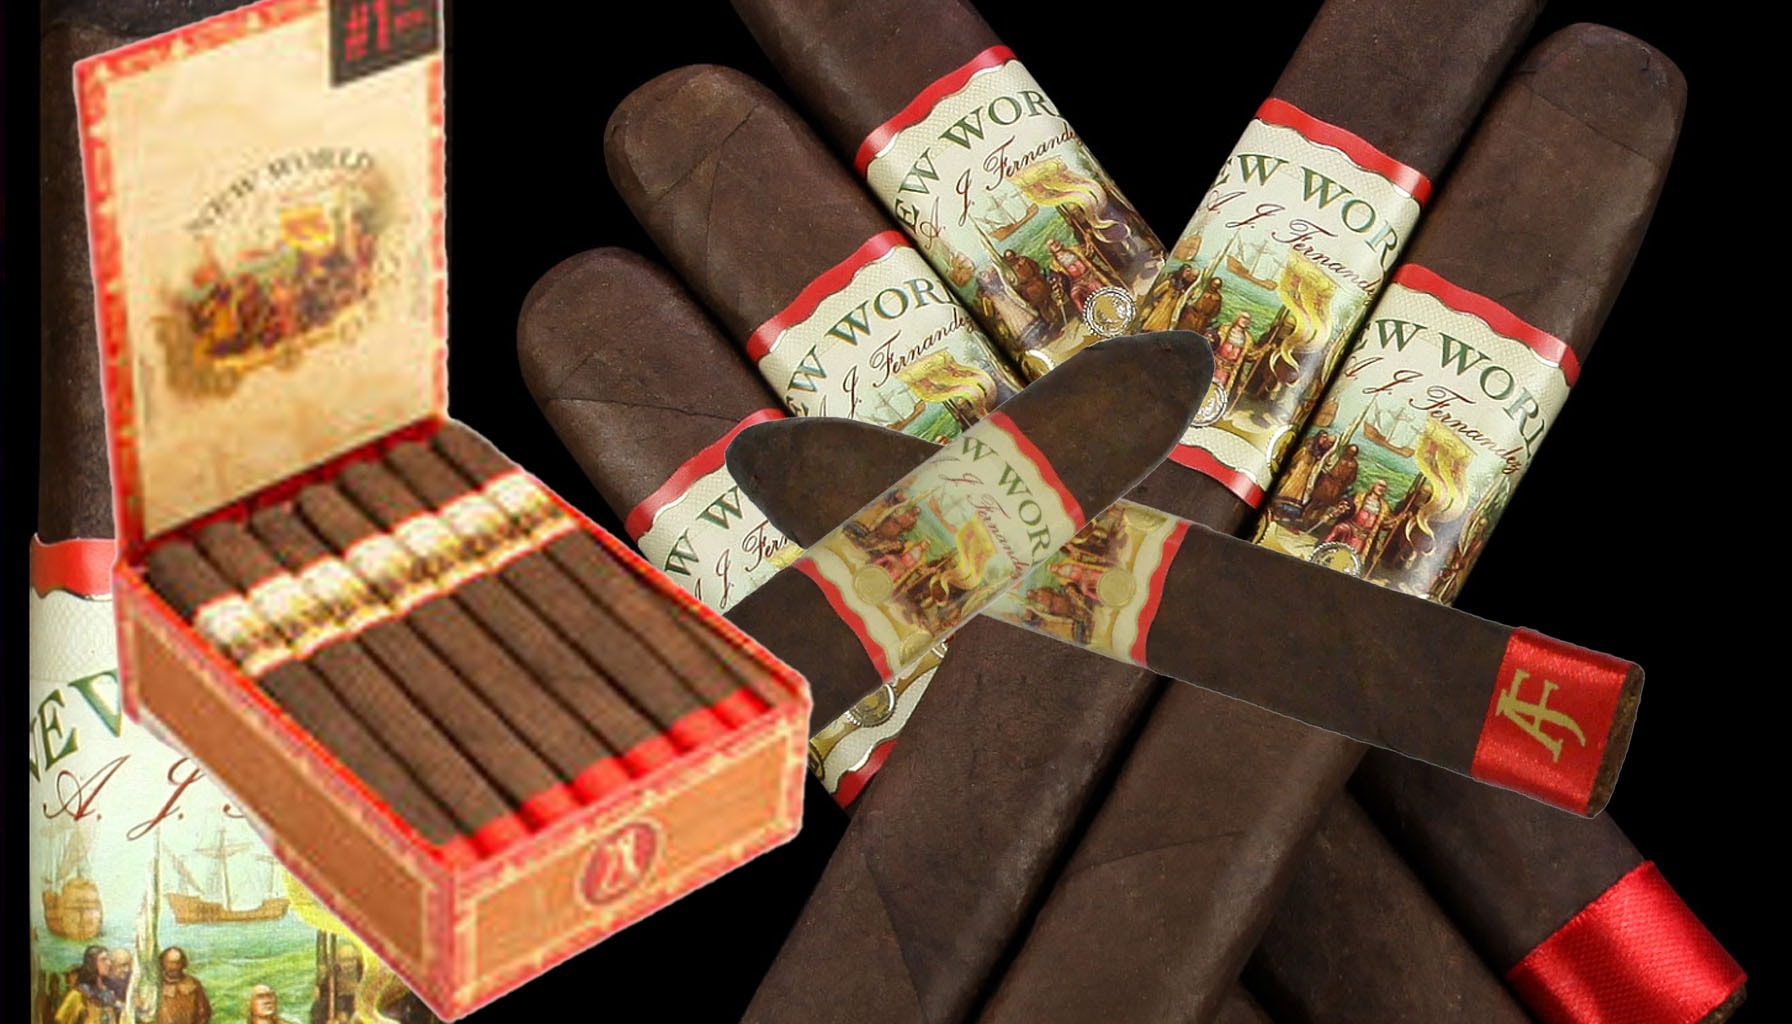 A medium to full-bodied cigar with a perfect balance of sweetness and spiciness